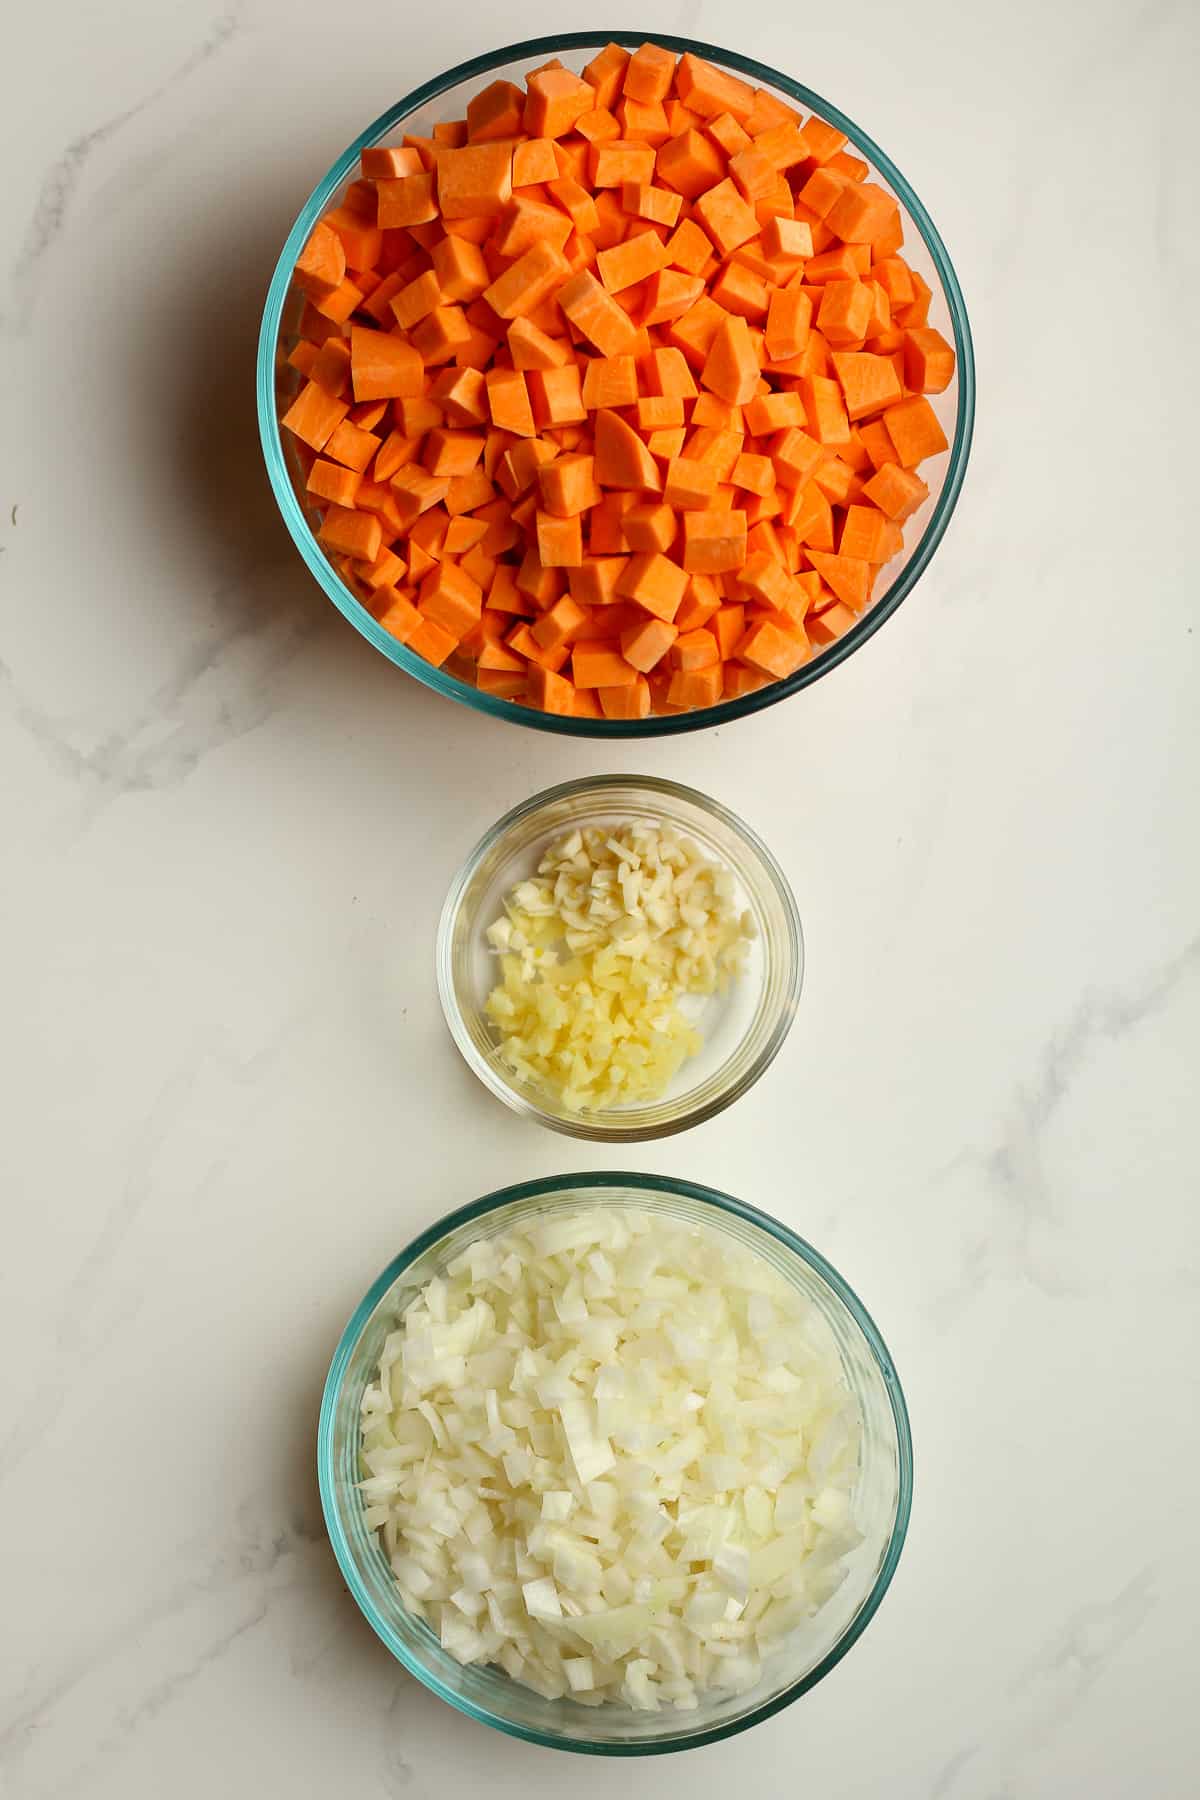 Bowls of the diced veggies.